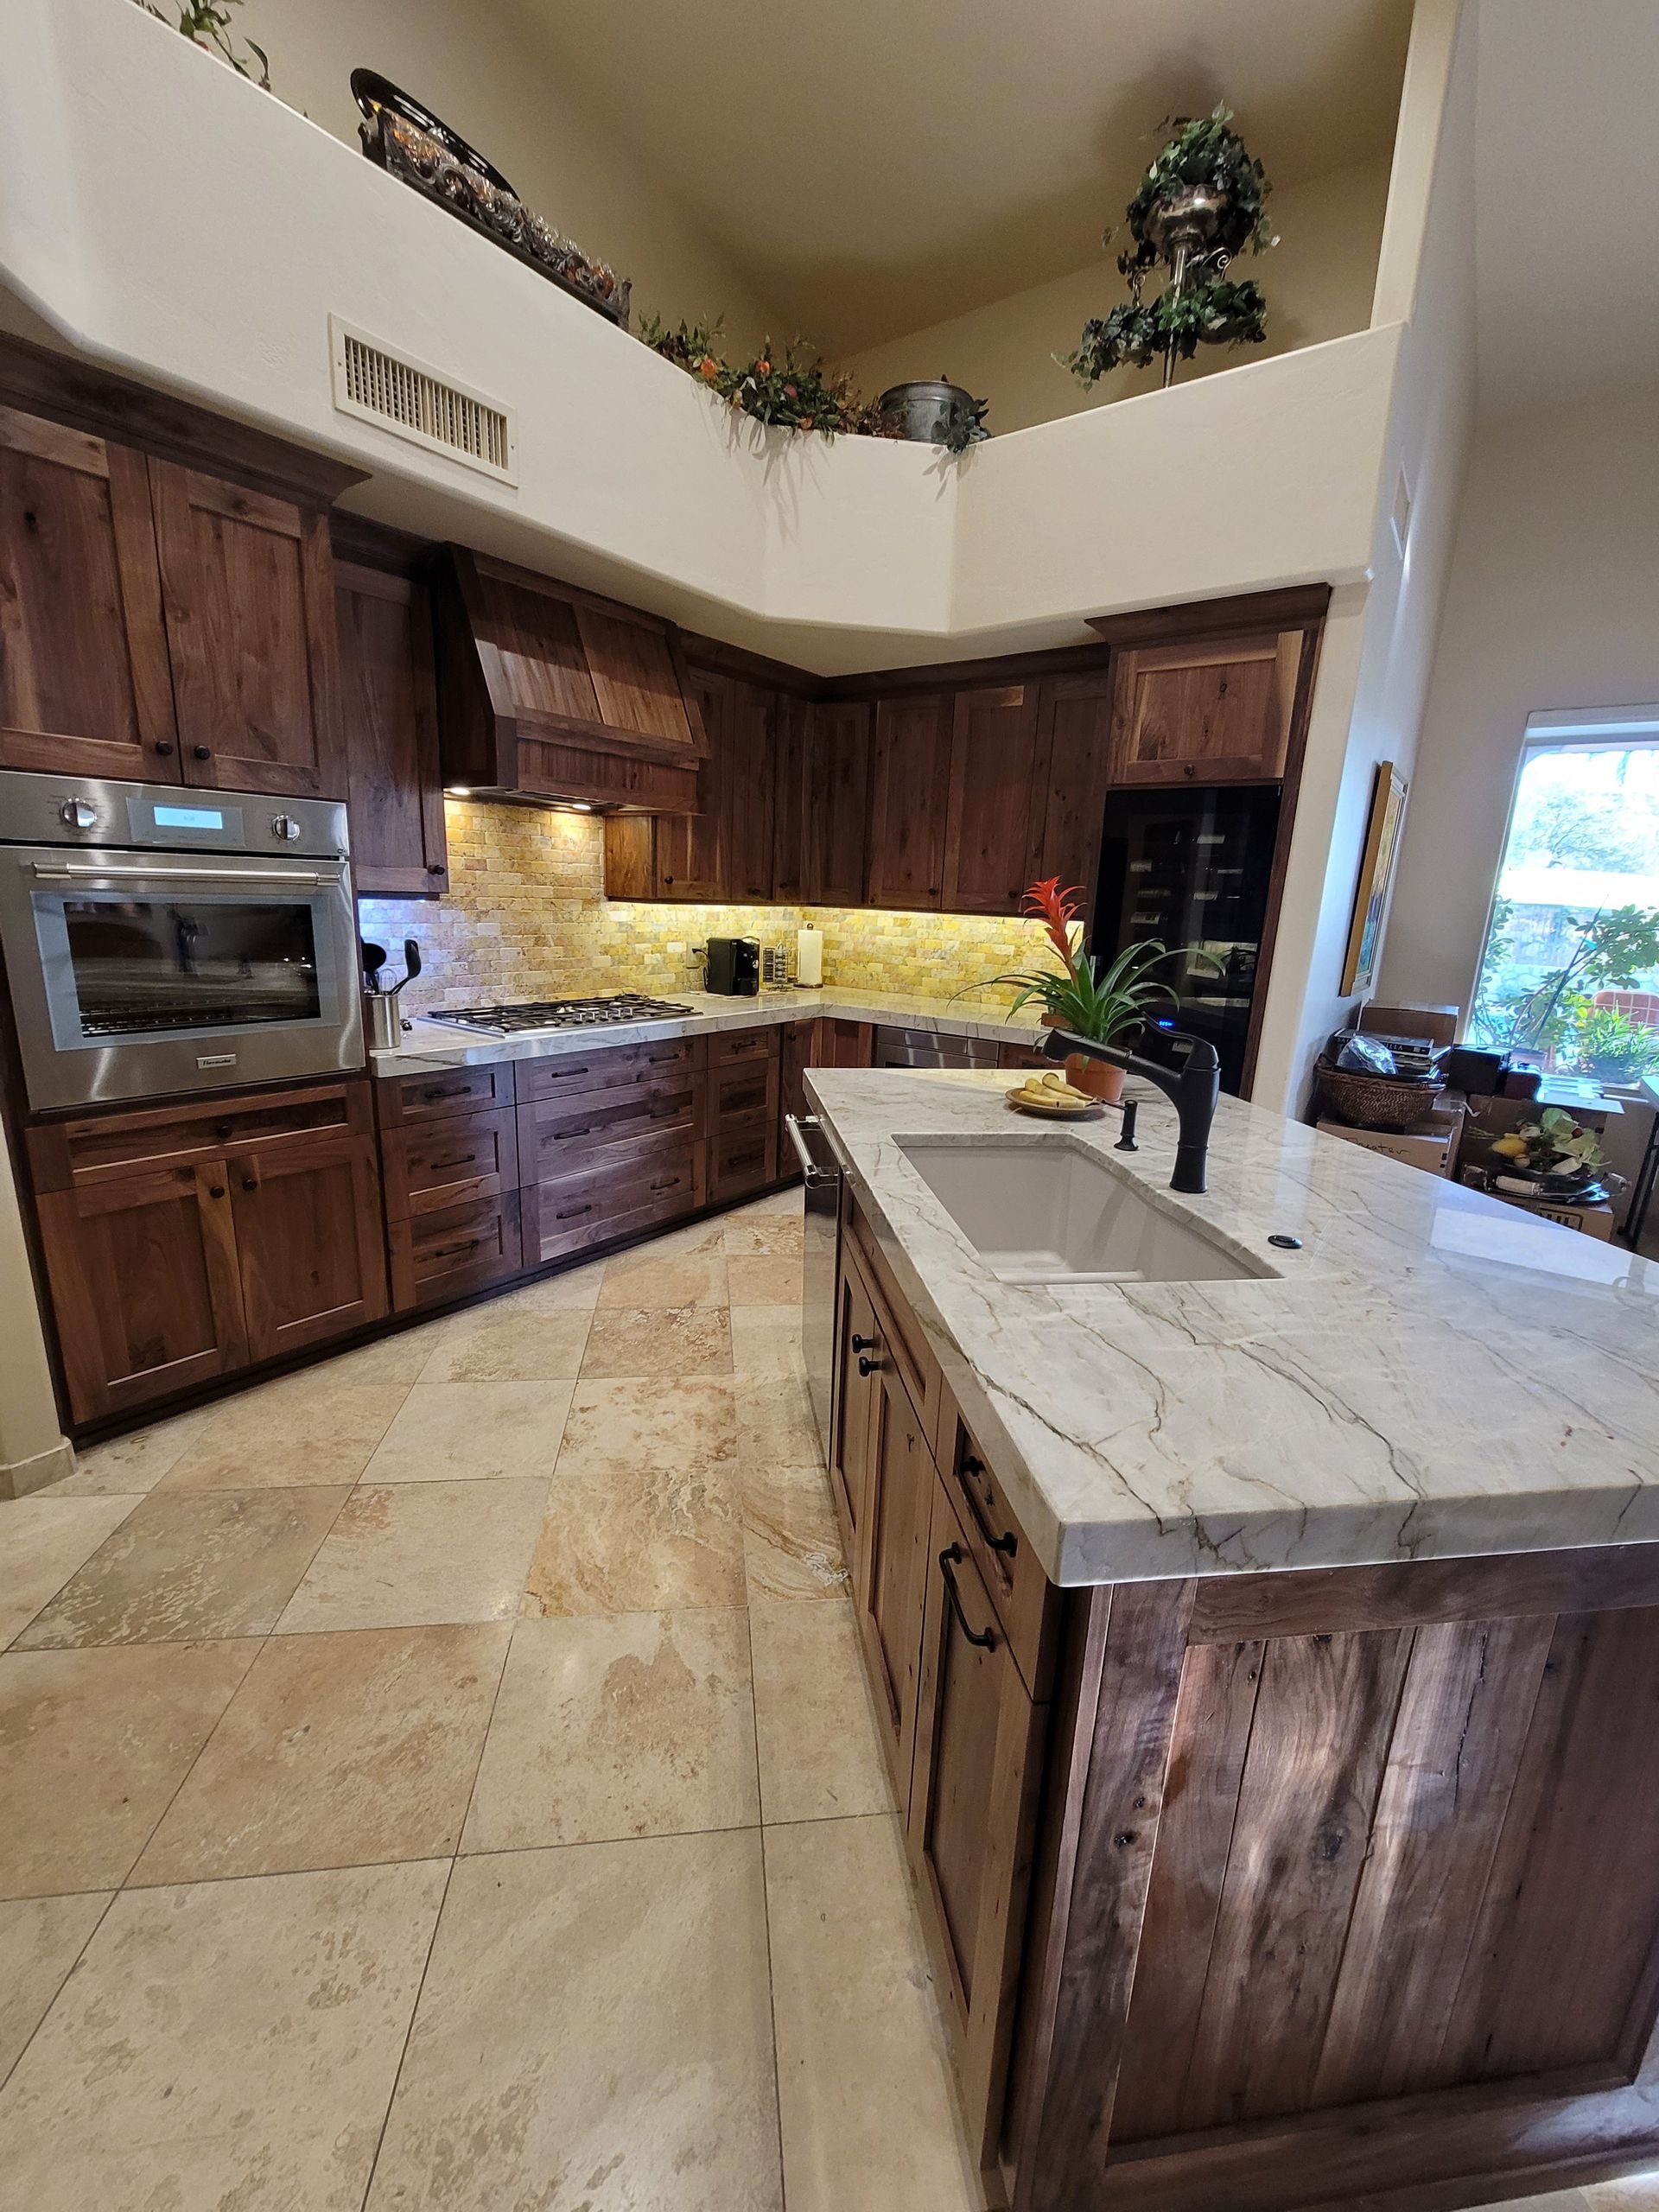 Modern kitchen remodel in [Tucson, AZ] featuring cabinets, waterfall quartz countertops with gold veins, stainless steel appliances (gas range with pot filler faucet, refrigerator, dishwasher, microwave), wood accent breakfast bar, globe pendant lighting.